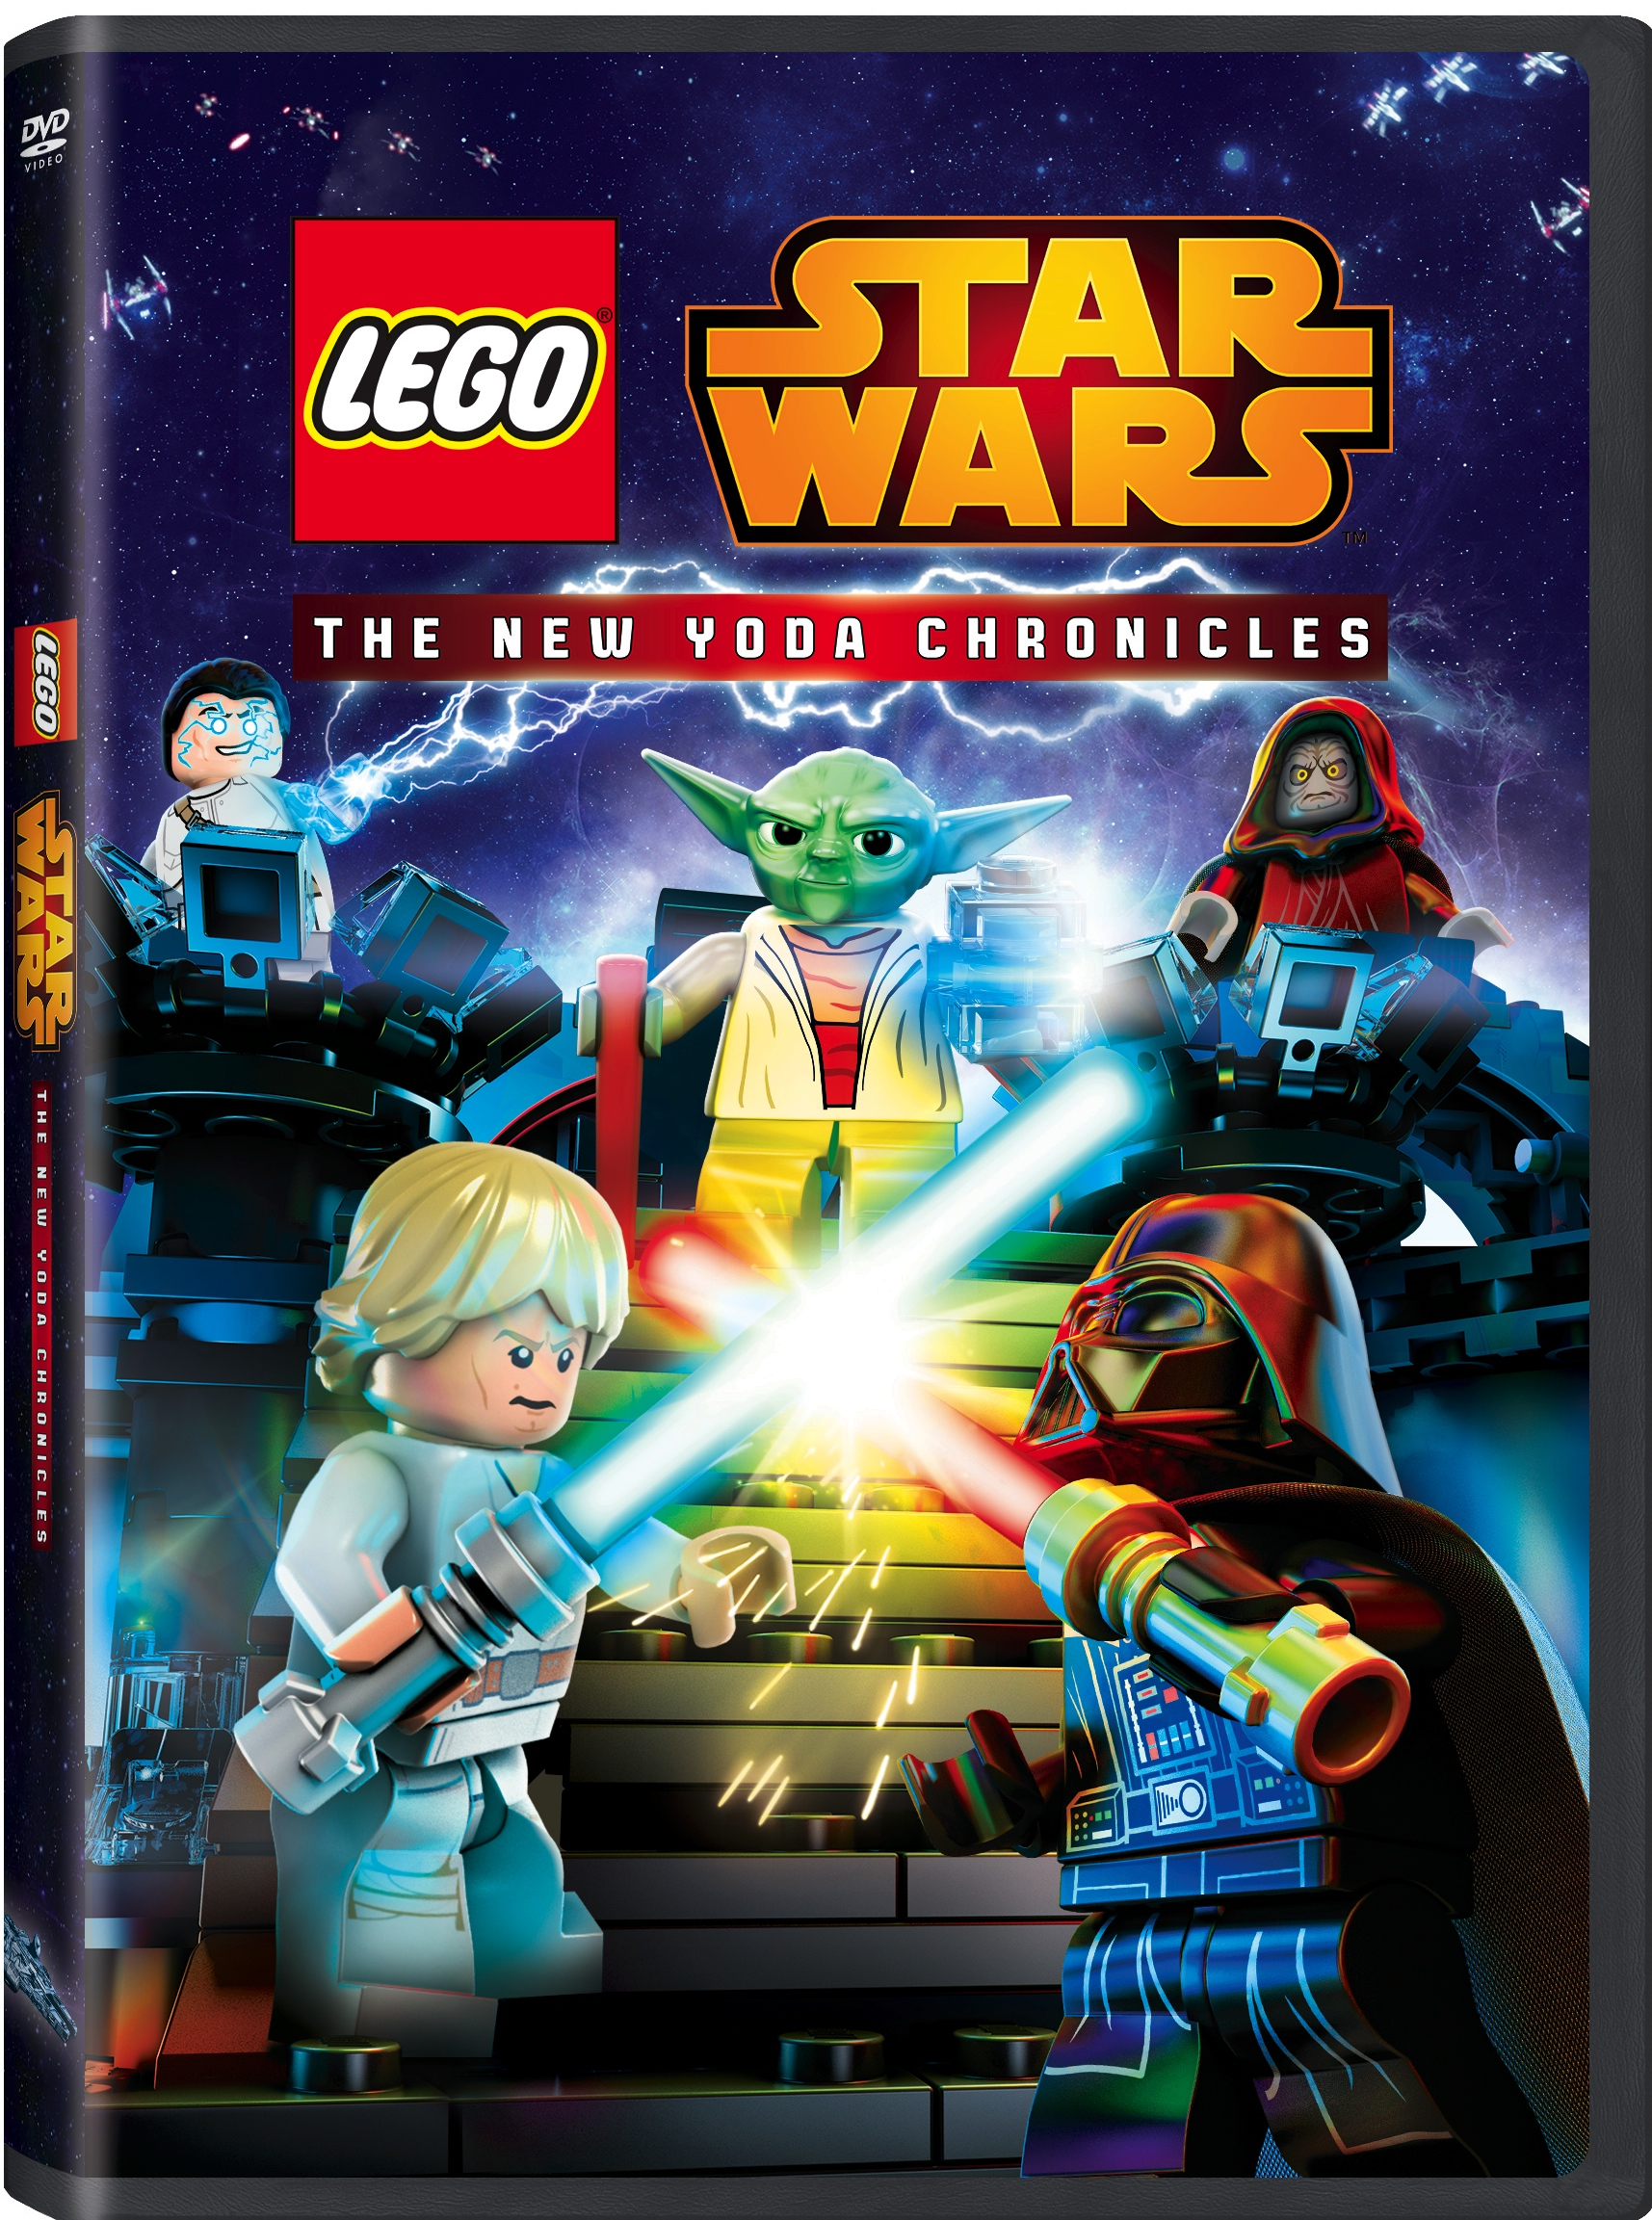 Lego Star Wars: The New Yoda Chronicles Heads to DVD 9/15